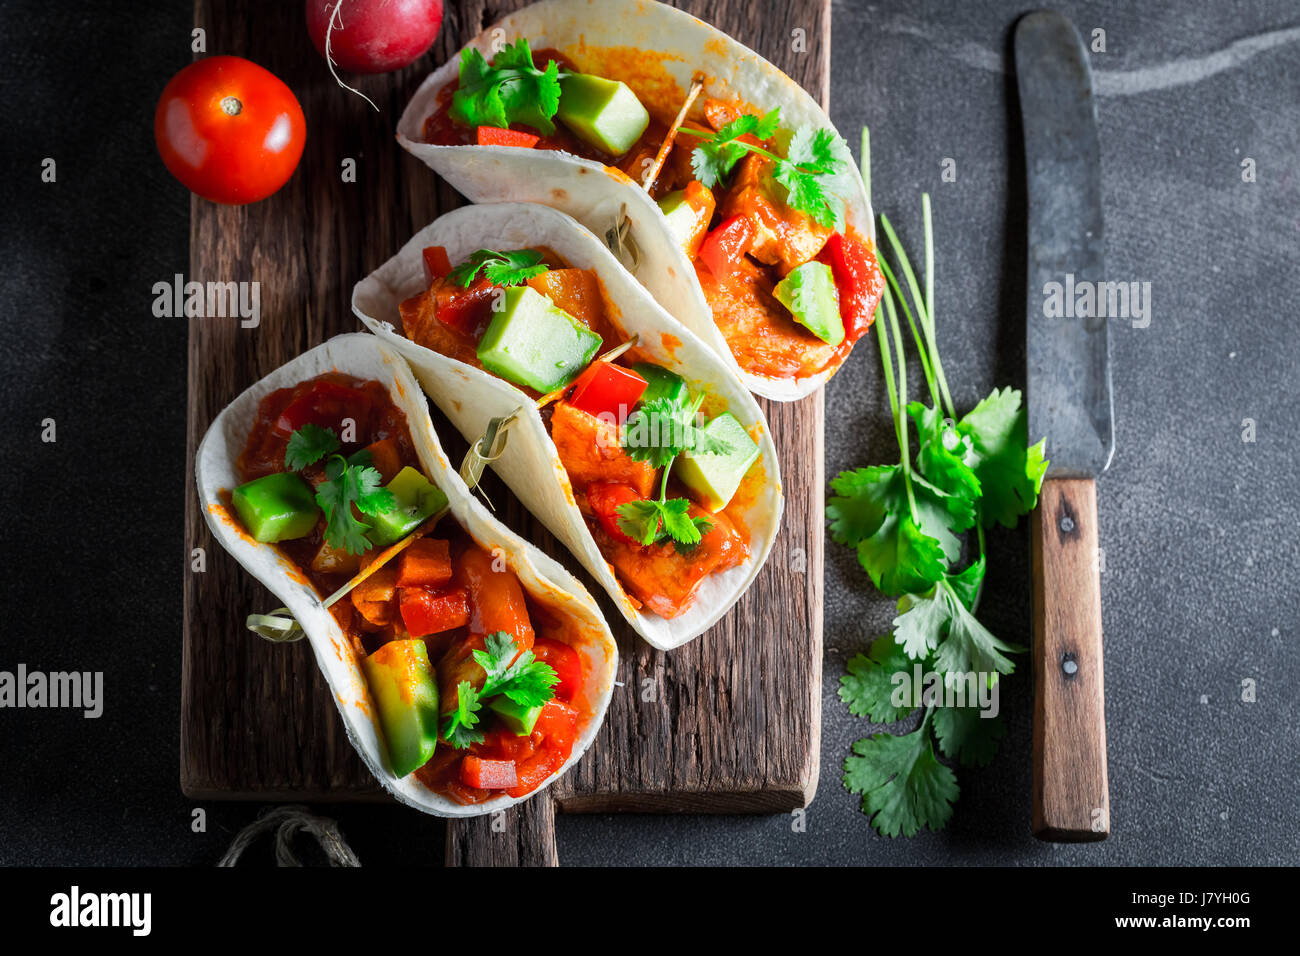 Spicy tacos with avocado, lime and tomato sauce Stock Photo